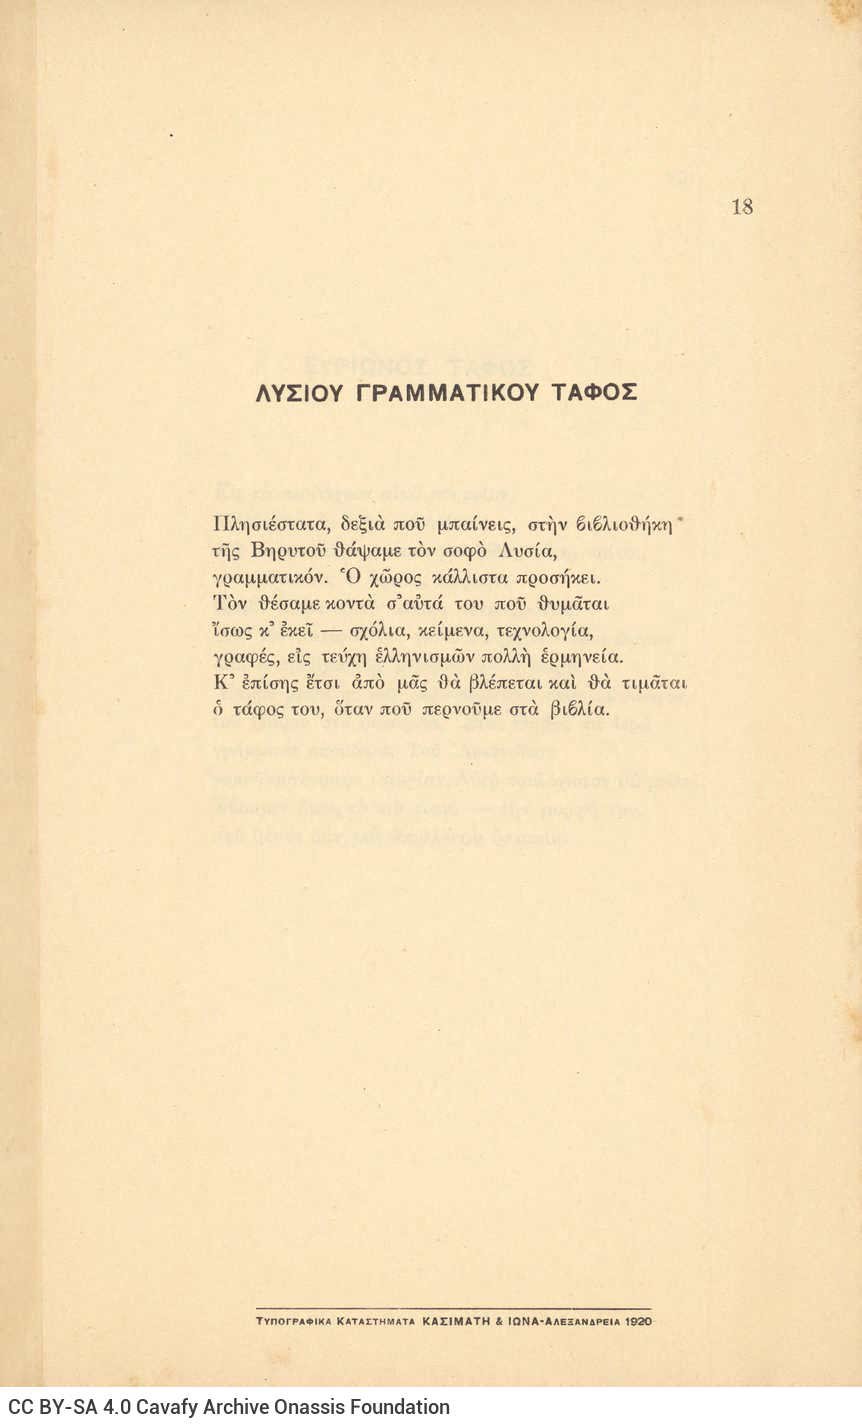 Cavafy's poetry collection (Γ4). The title "C. P. Cavafy's Poems (1908-1914)" on the cover and title page. The collection co